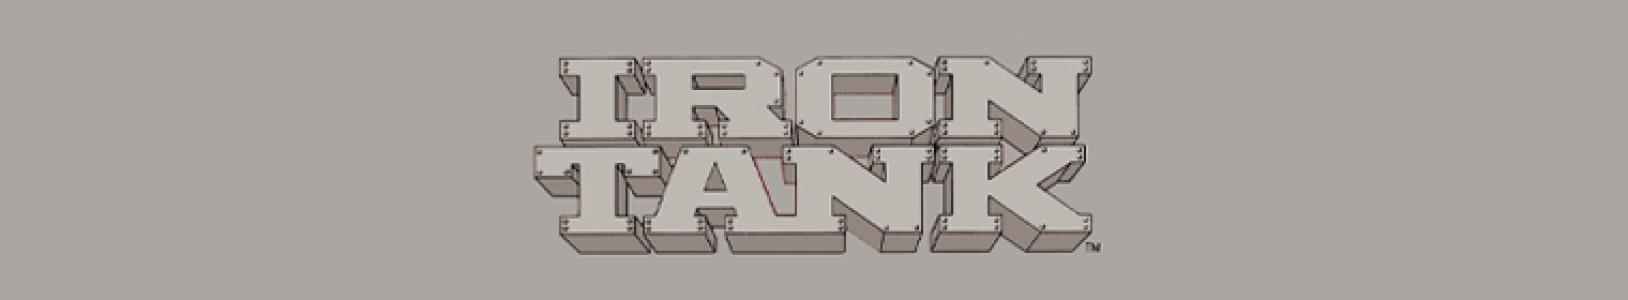 Iron Tank: The Invasion of Normandy banner